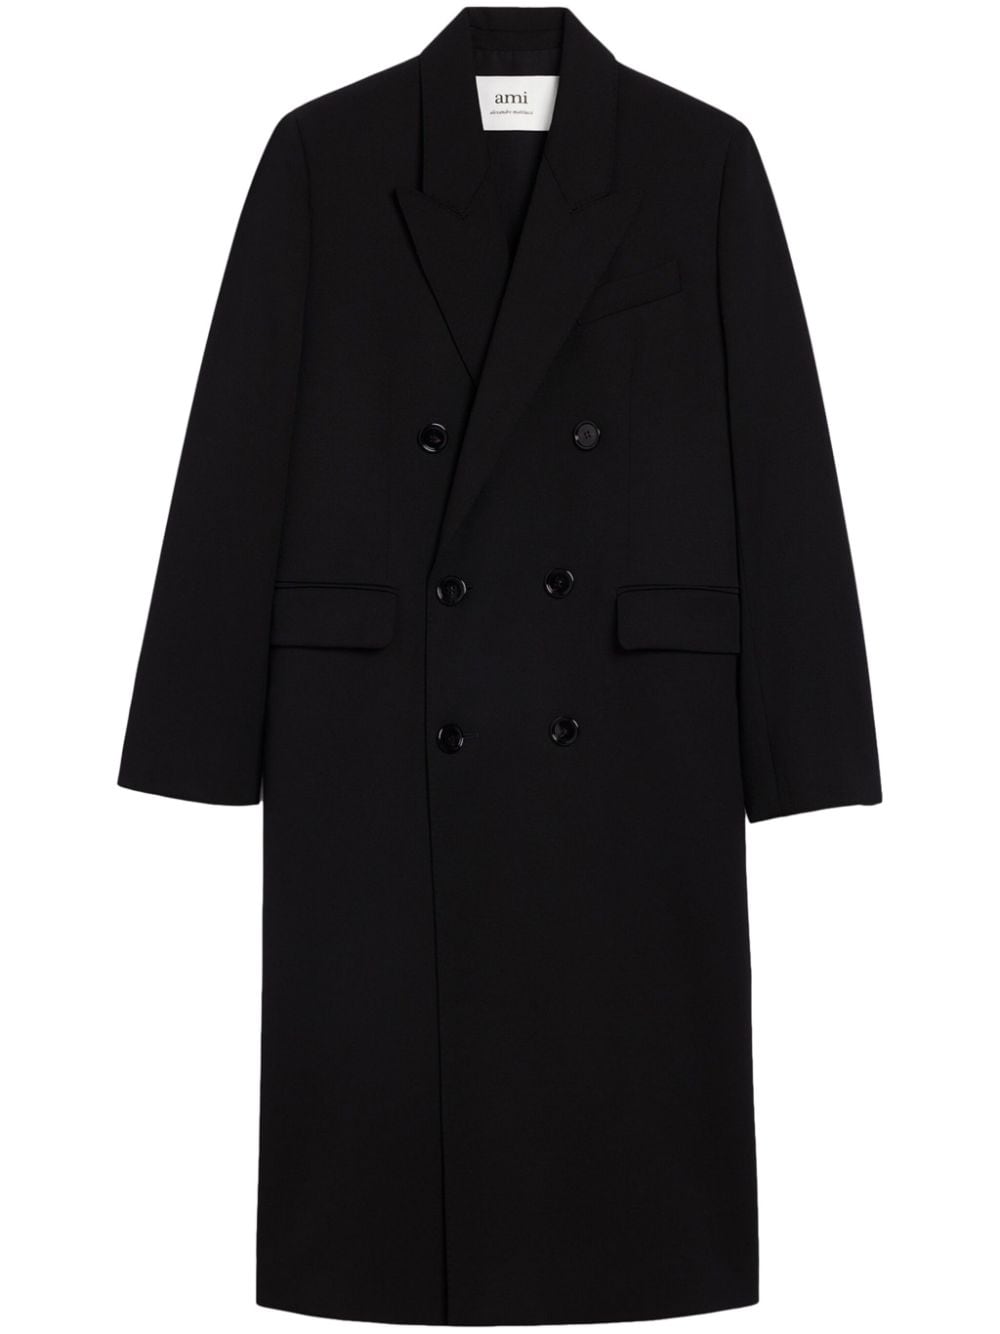 Image 1 of AMI Paris double-breasted wool coat